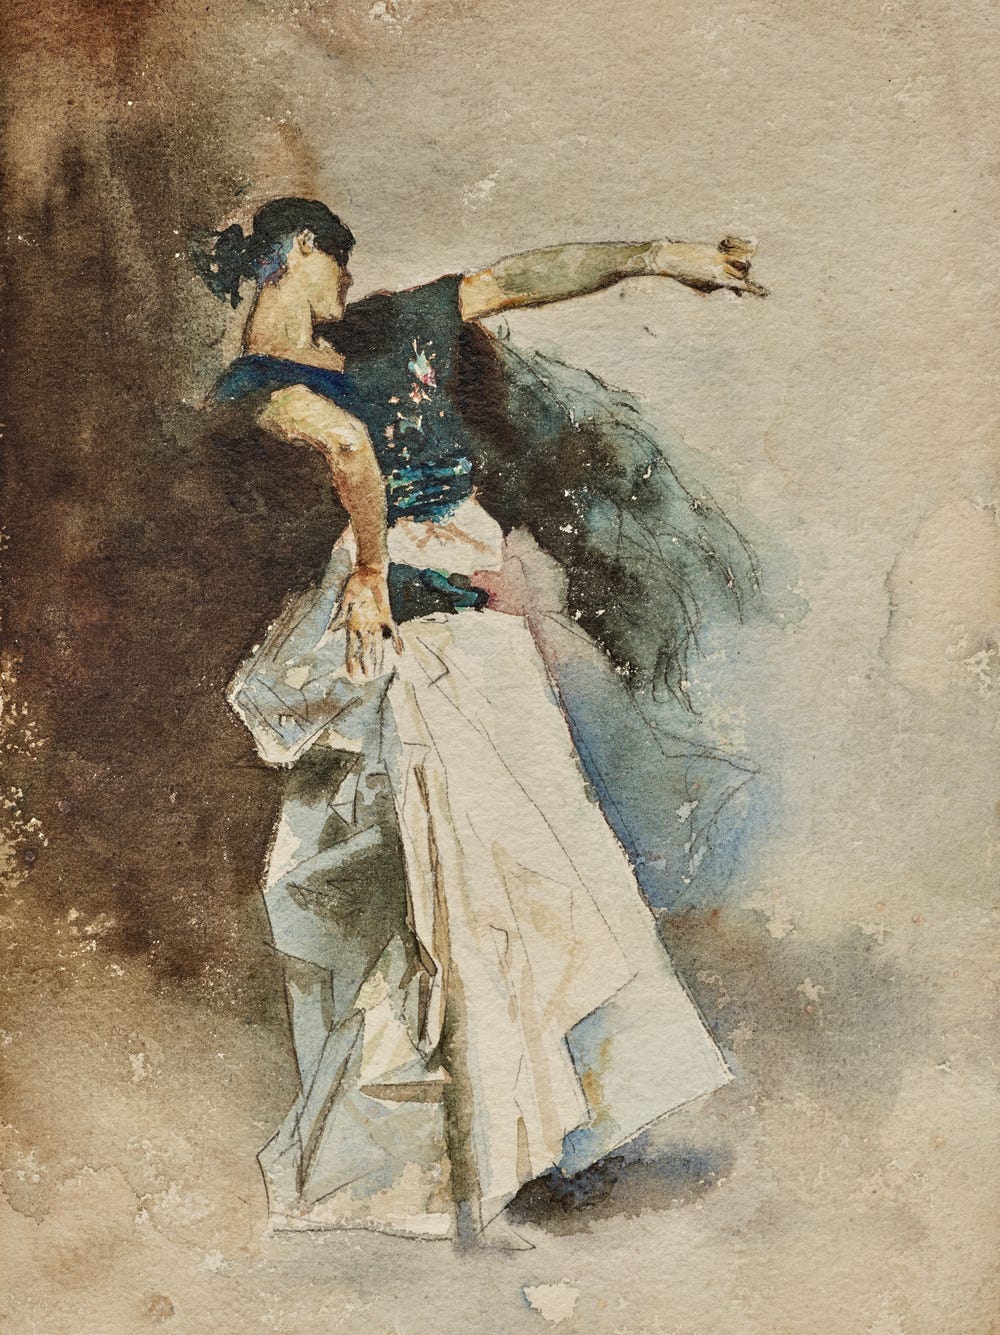 Dancer with arms and dress in motion